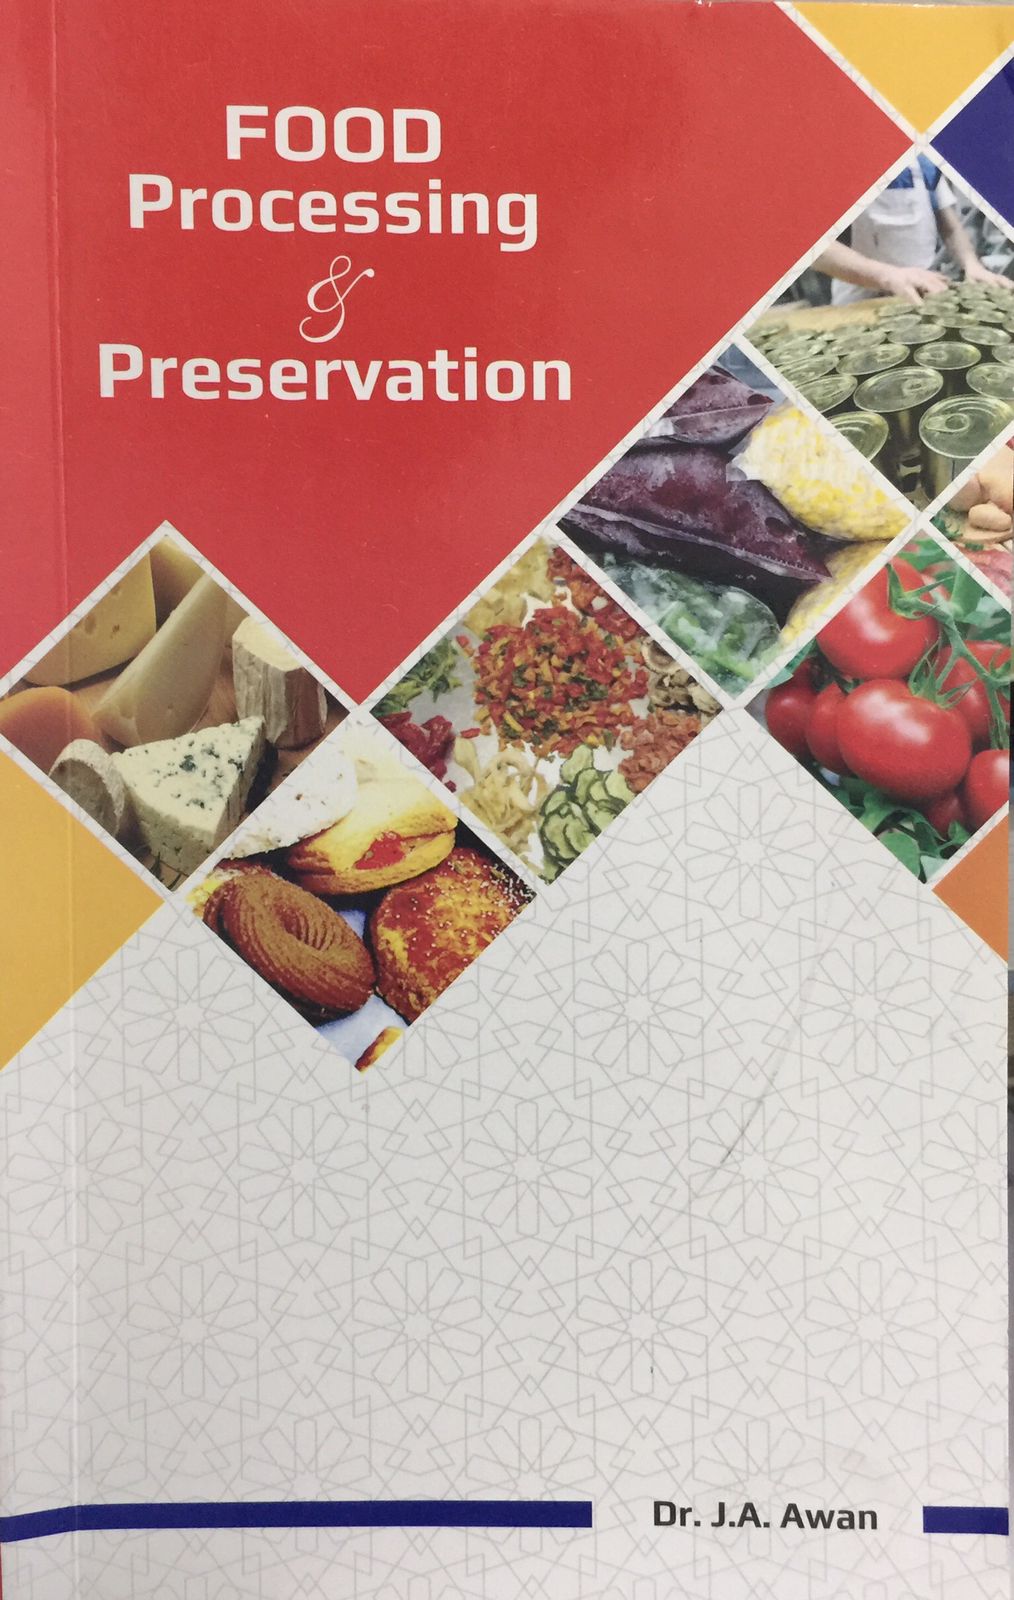 Food processing and preservation